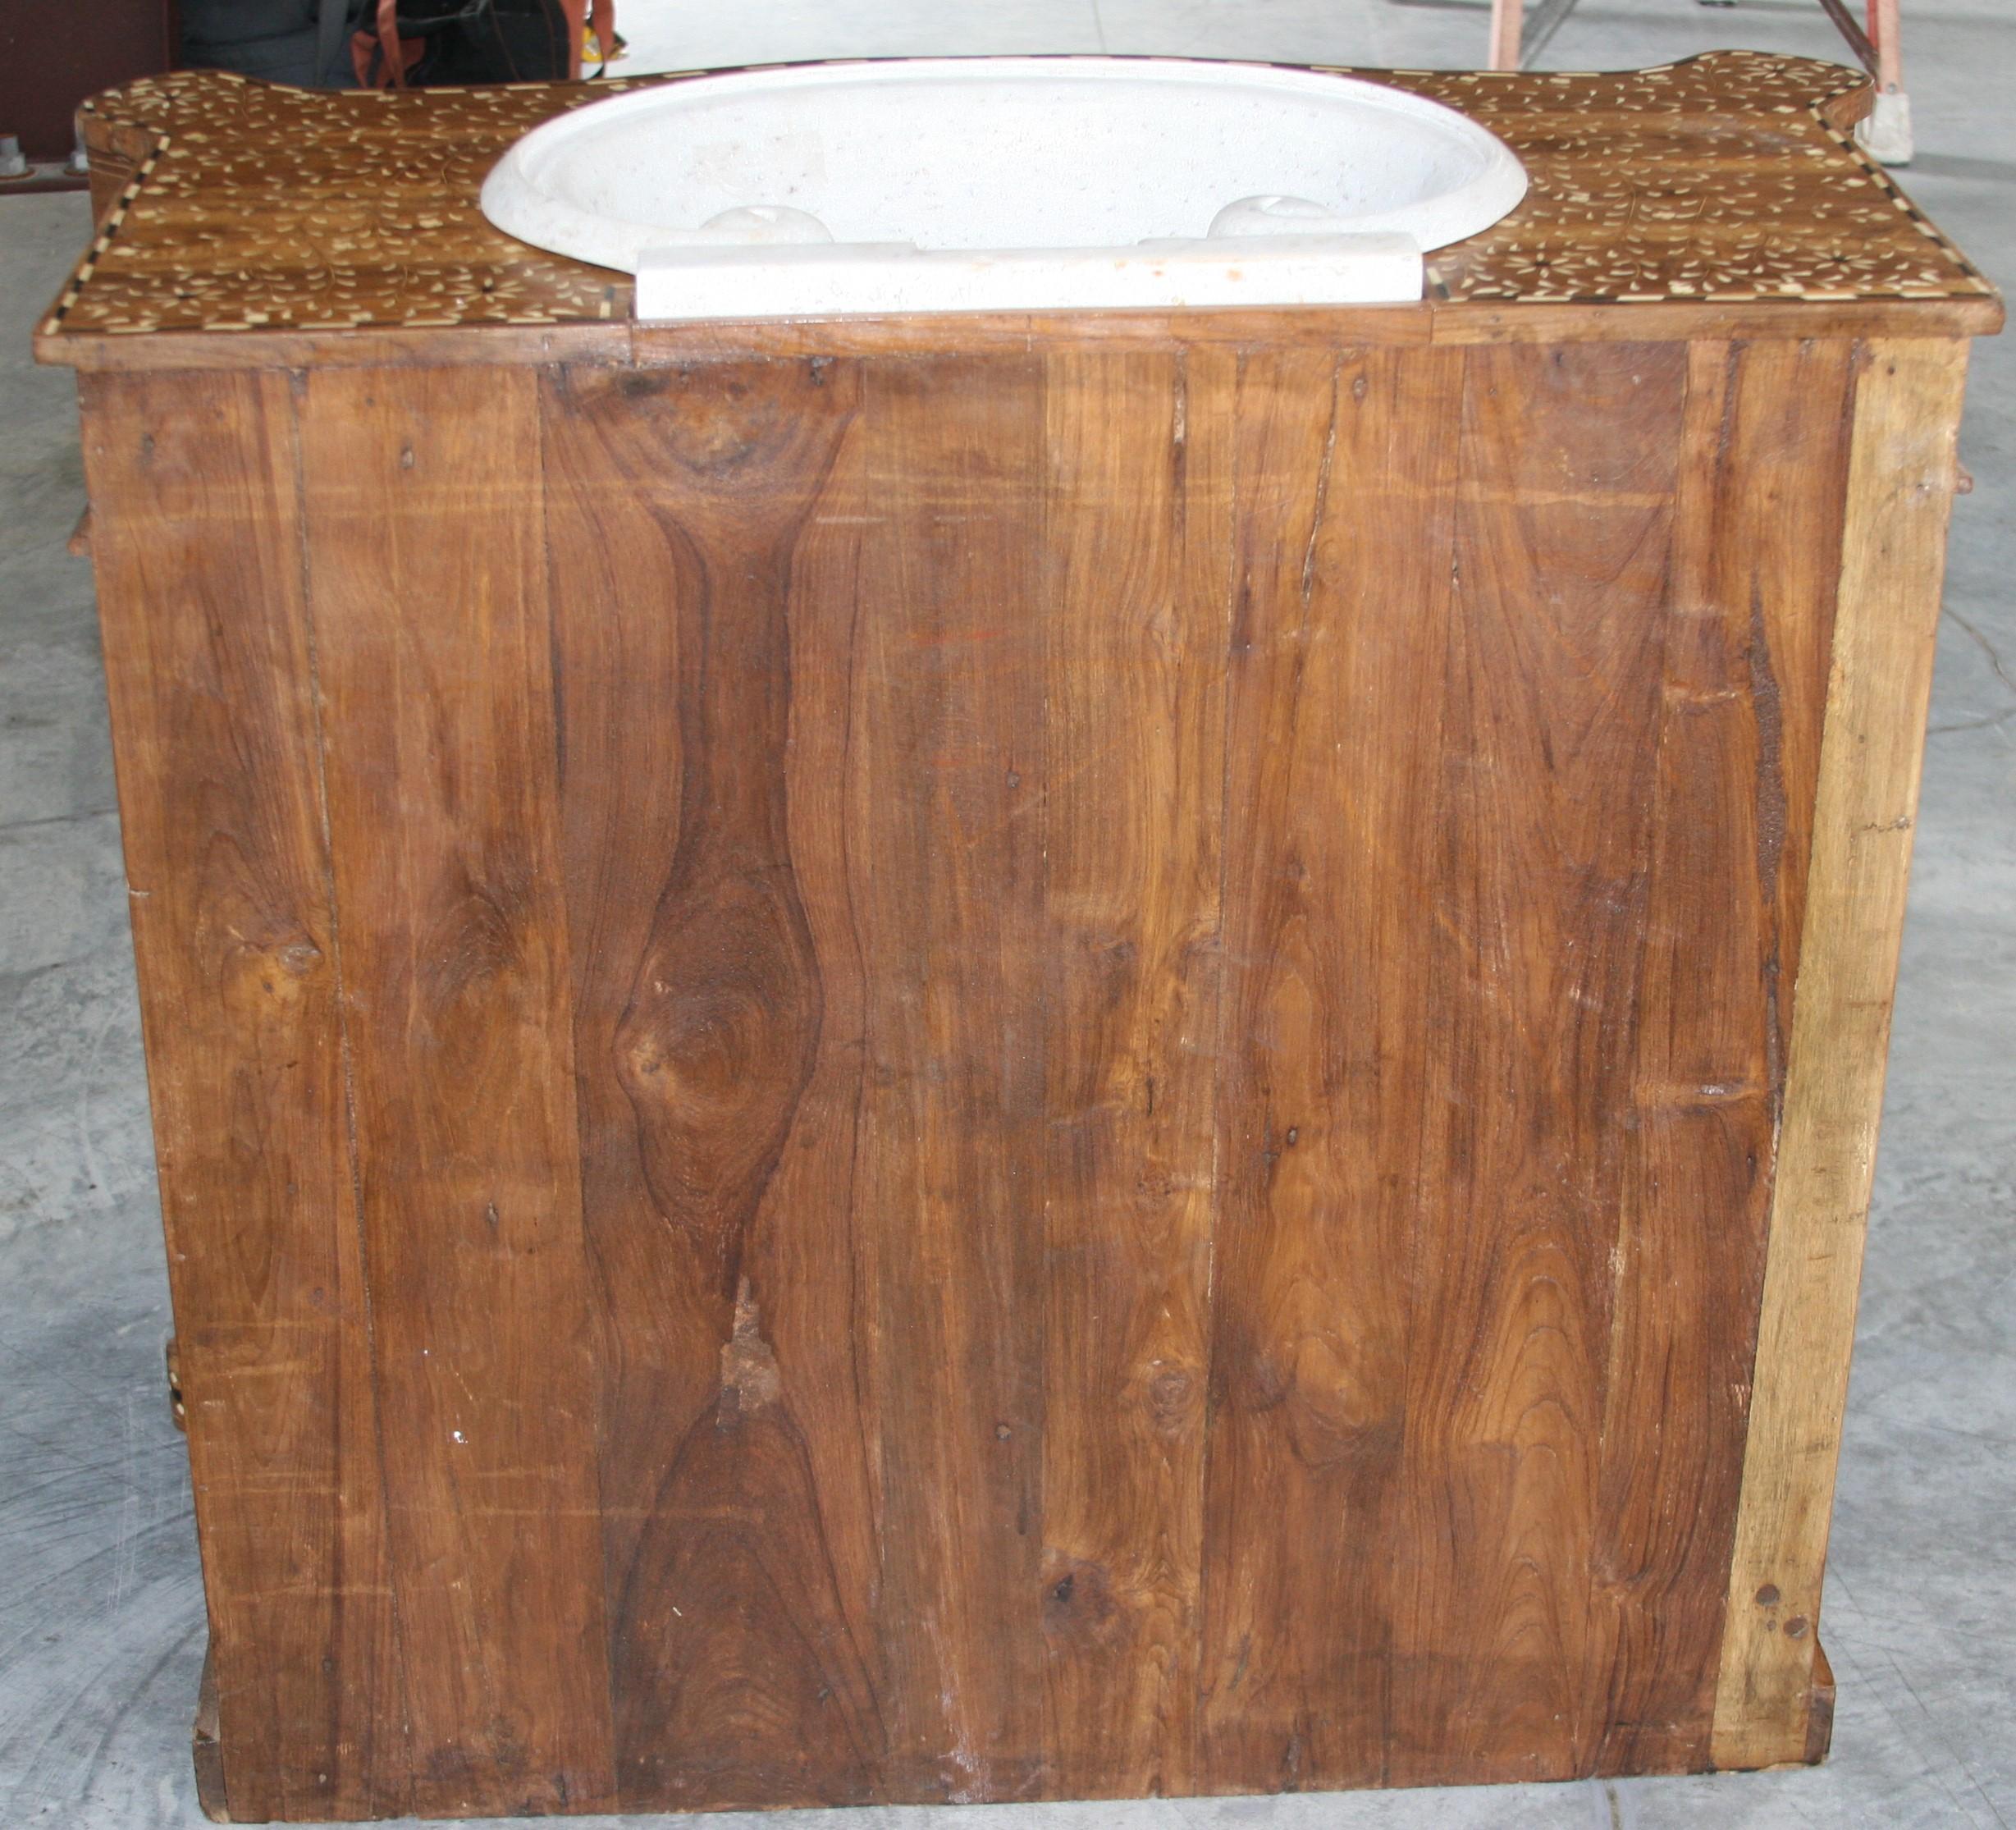 Fine Marble Sink on Solid Teak Wood Vanity Exquisitely Hand Inlaid with Bone For Sale 3